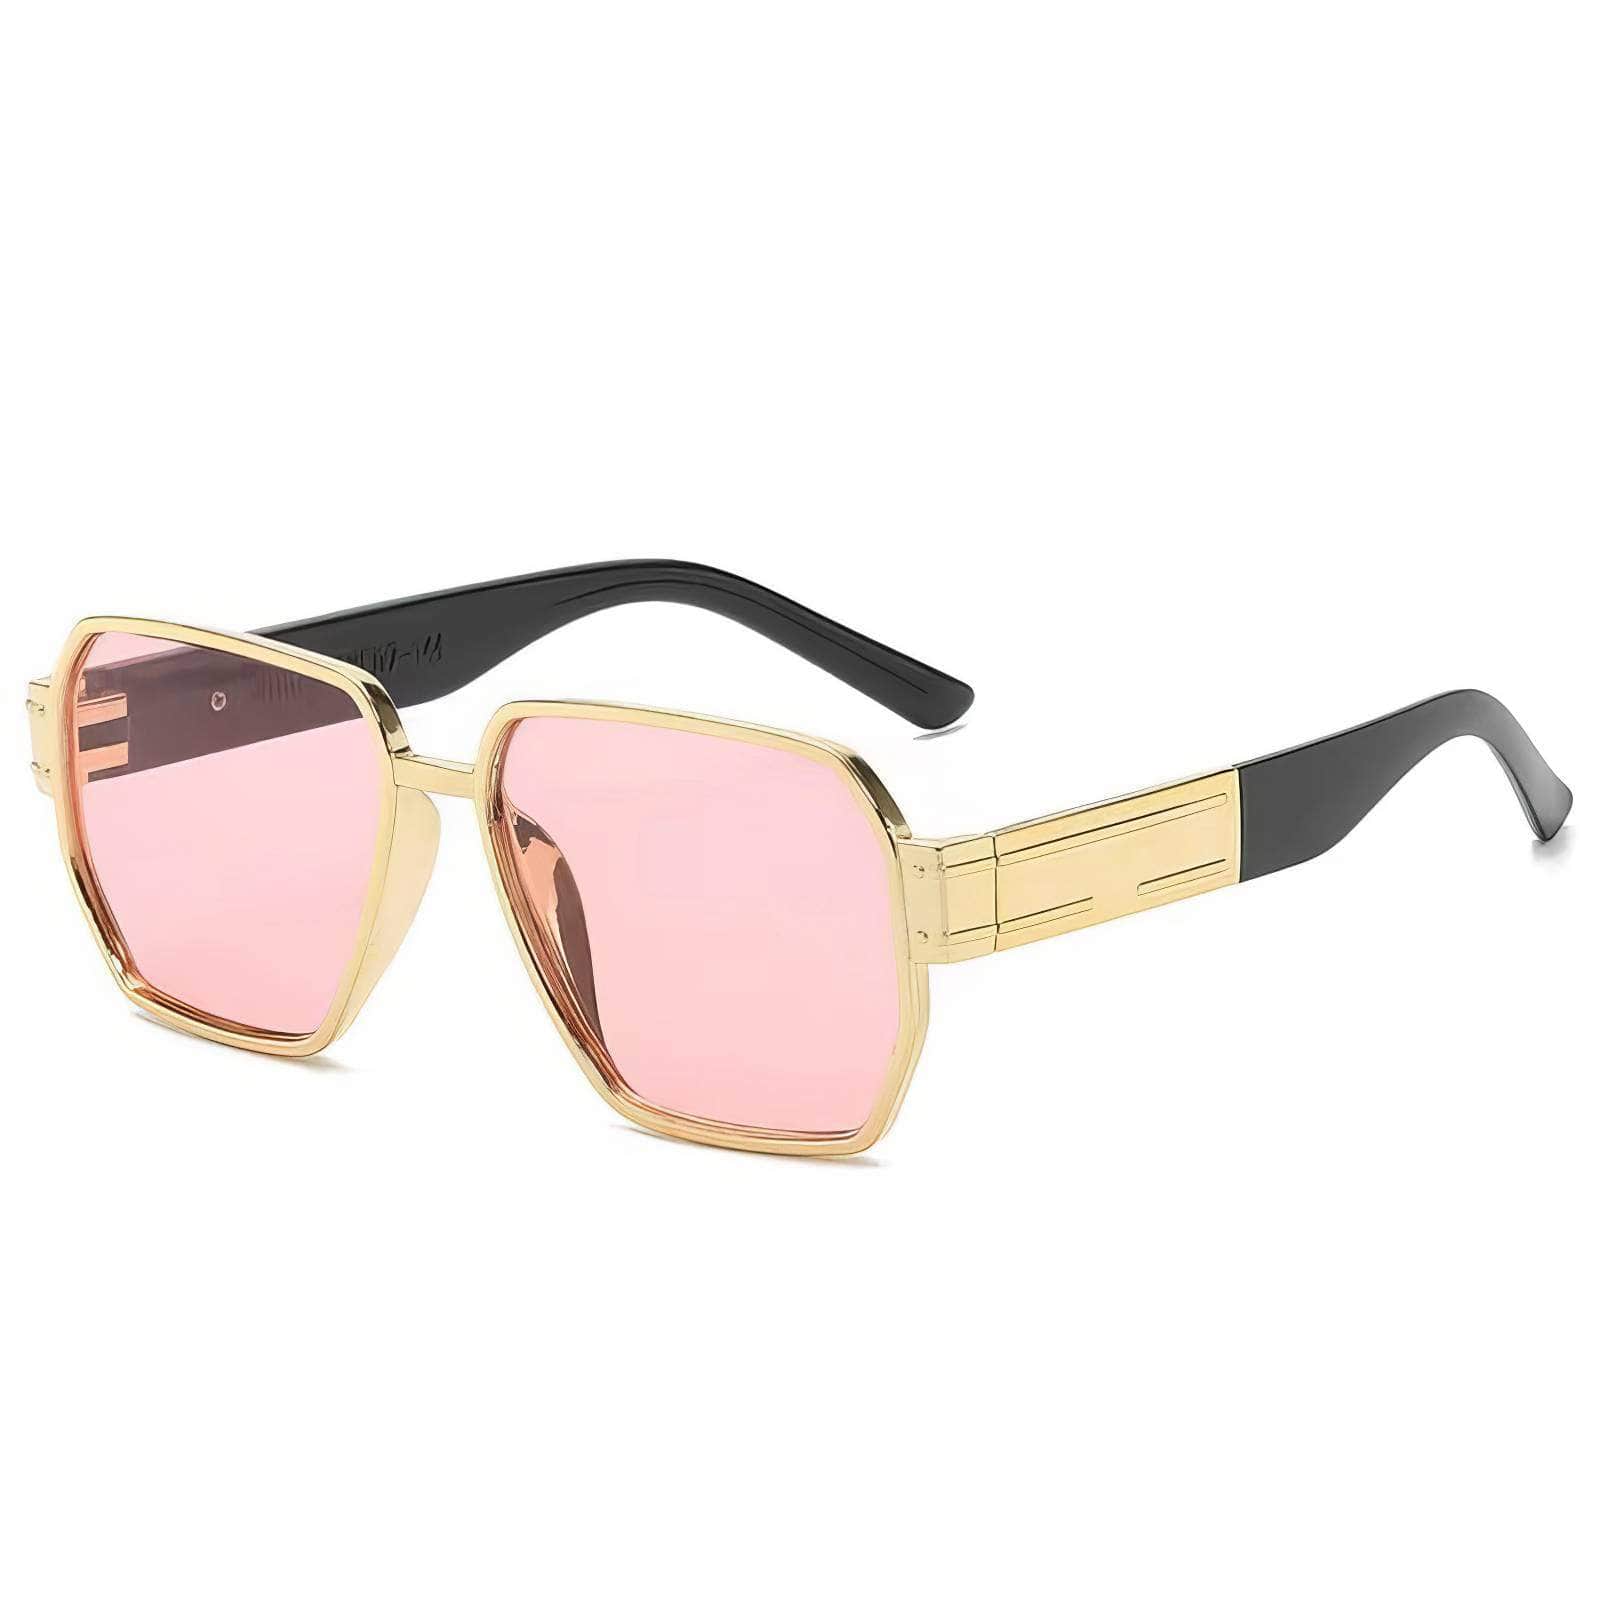 Simple Square Oversized Sunglasses Pink/Gold / Resin